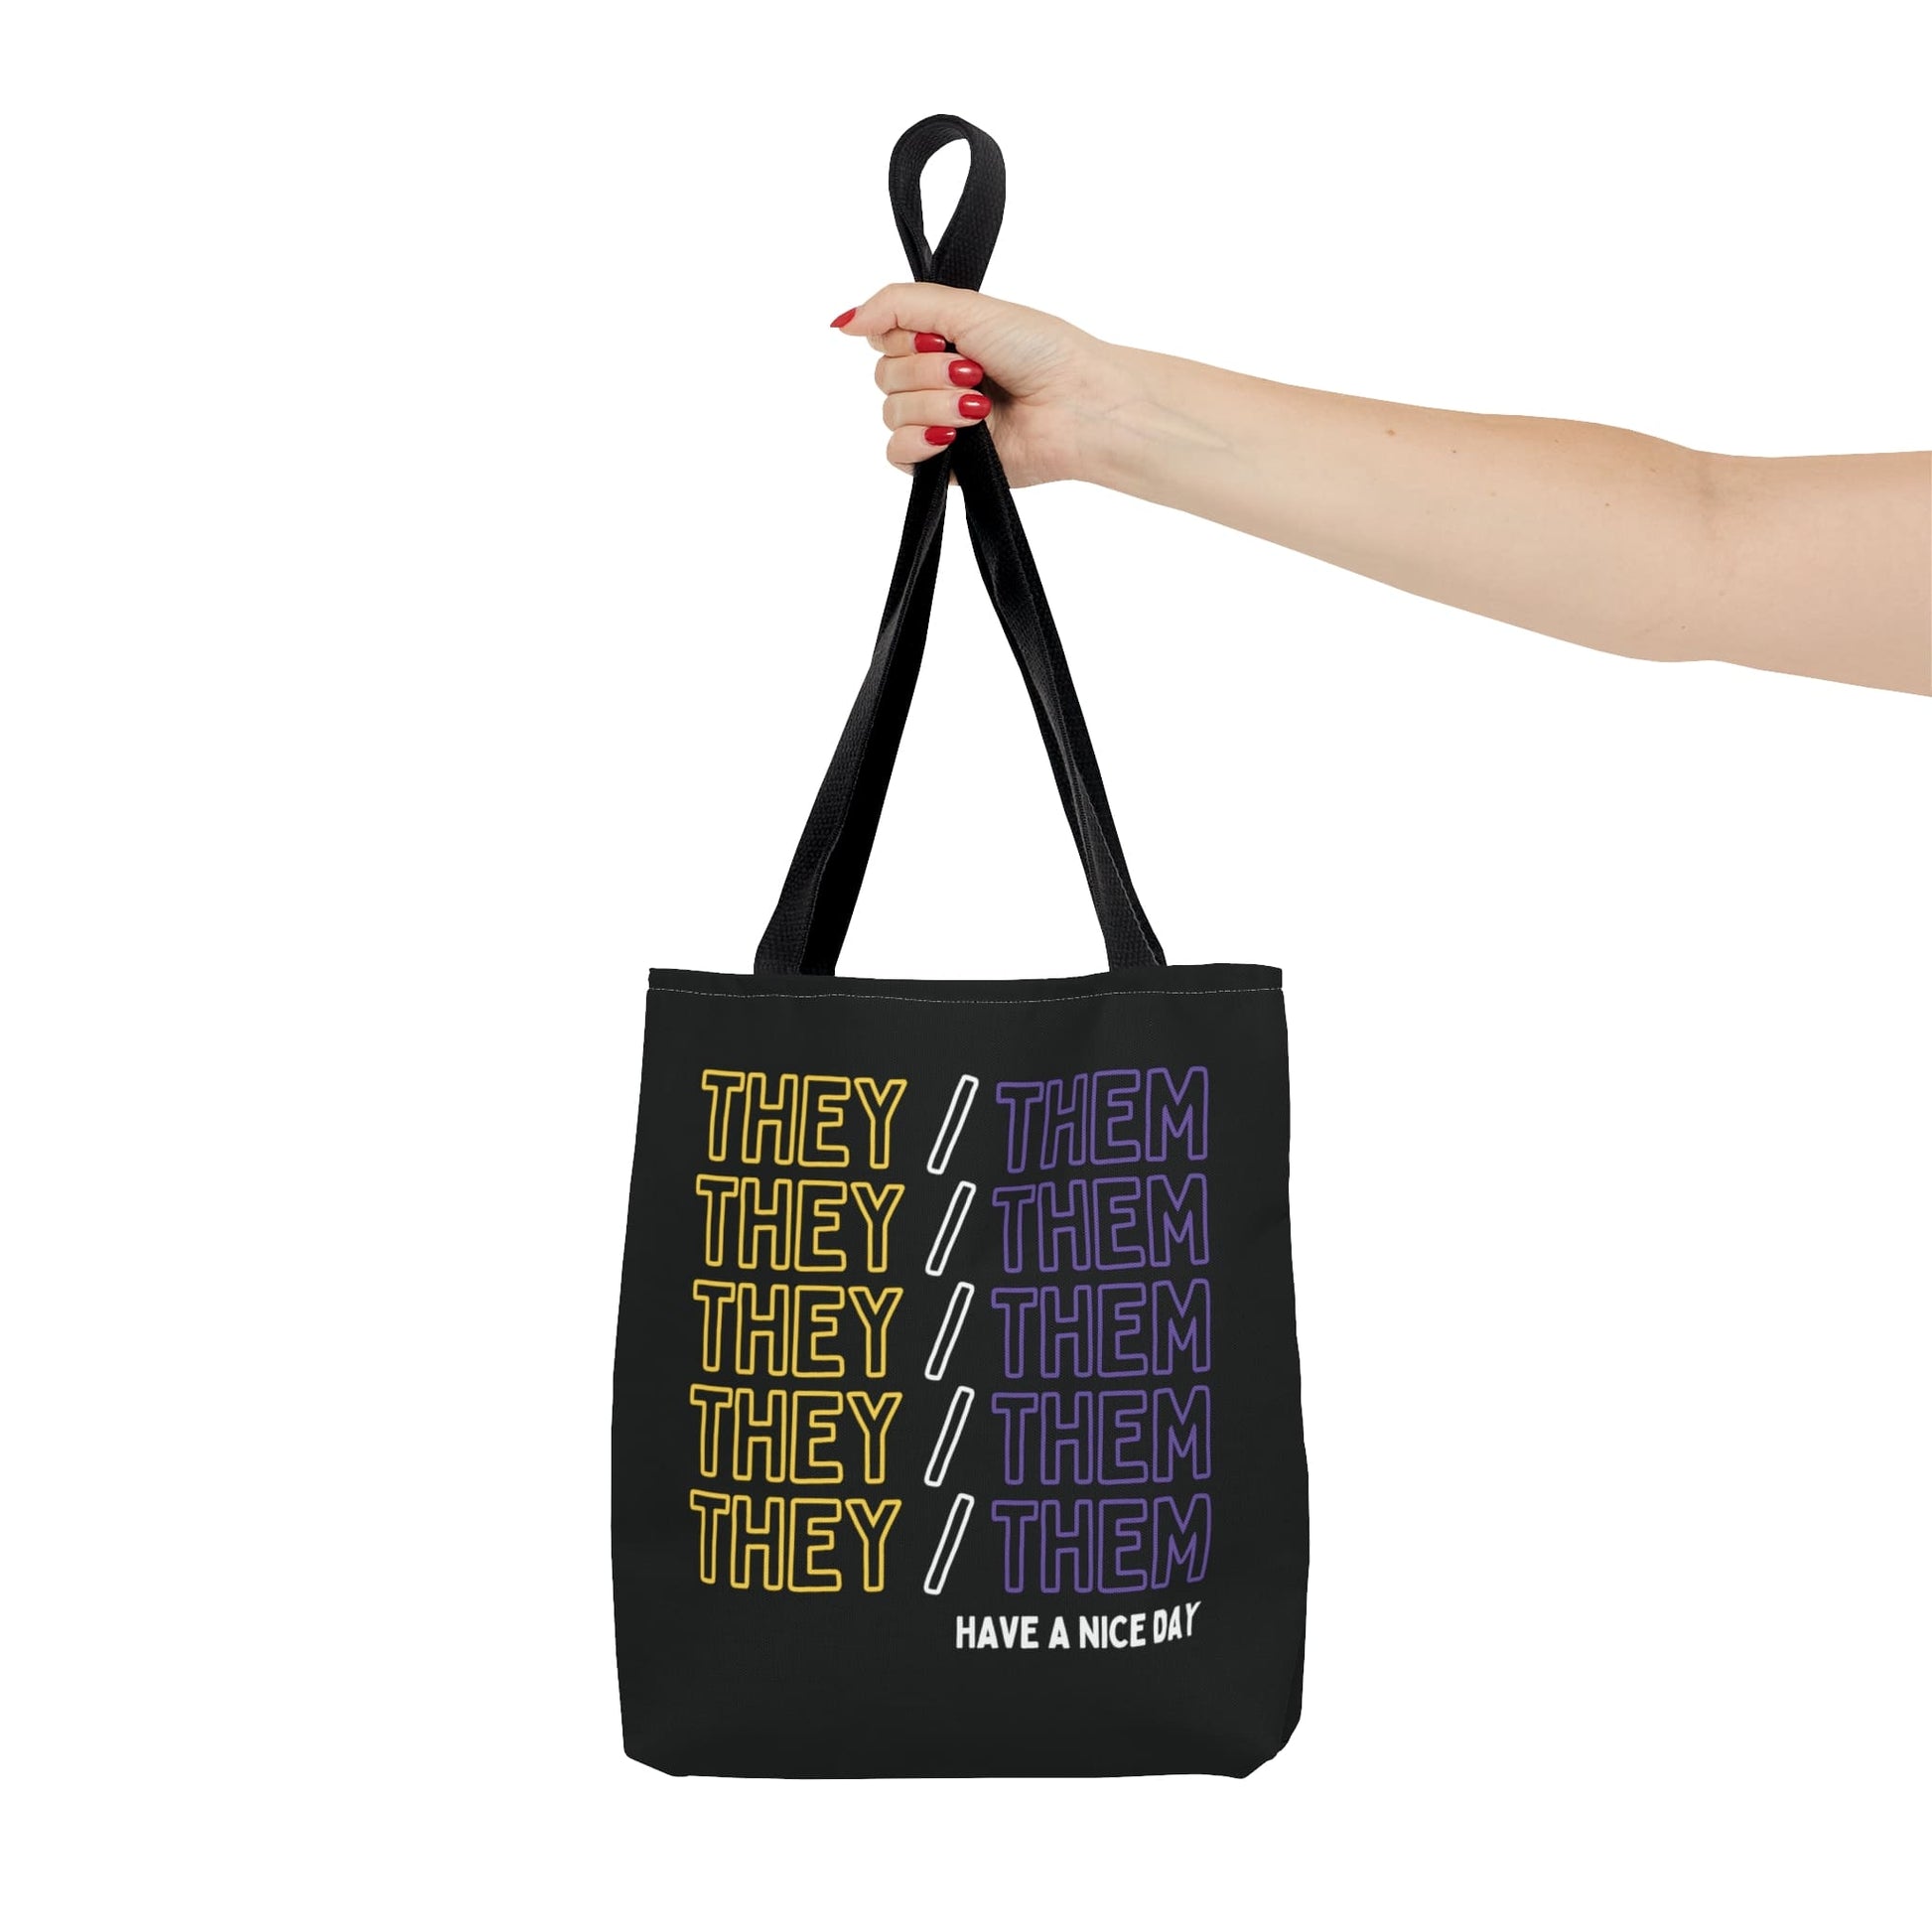 nonbinary tote bag, they them pronouns enby bag, small